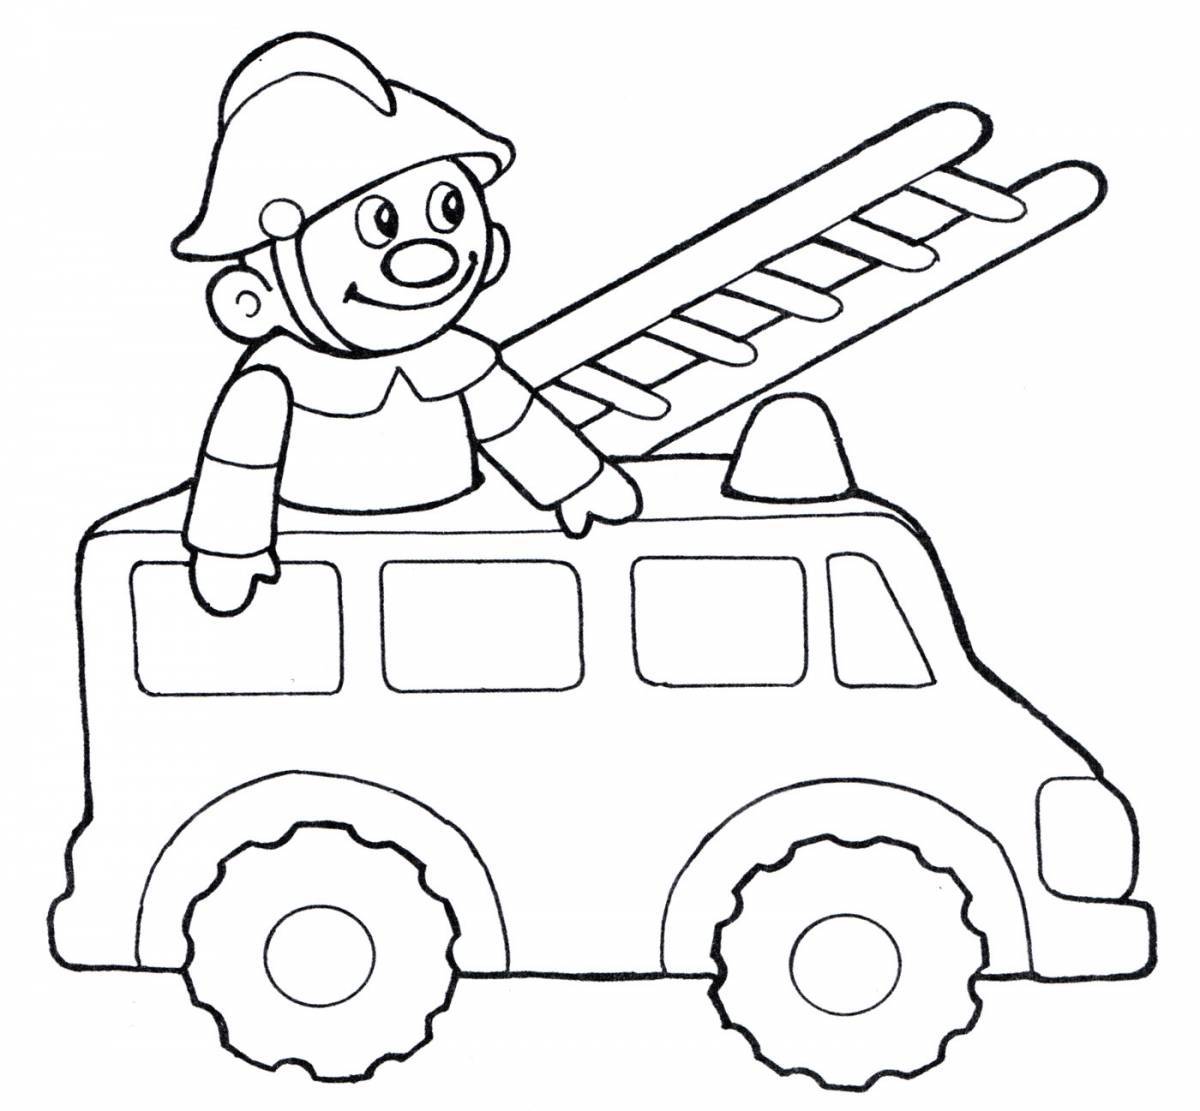 Fun fire truck coloring book for kids